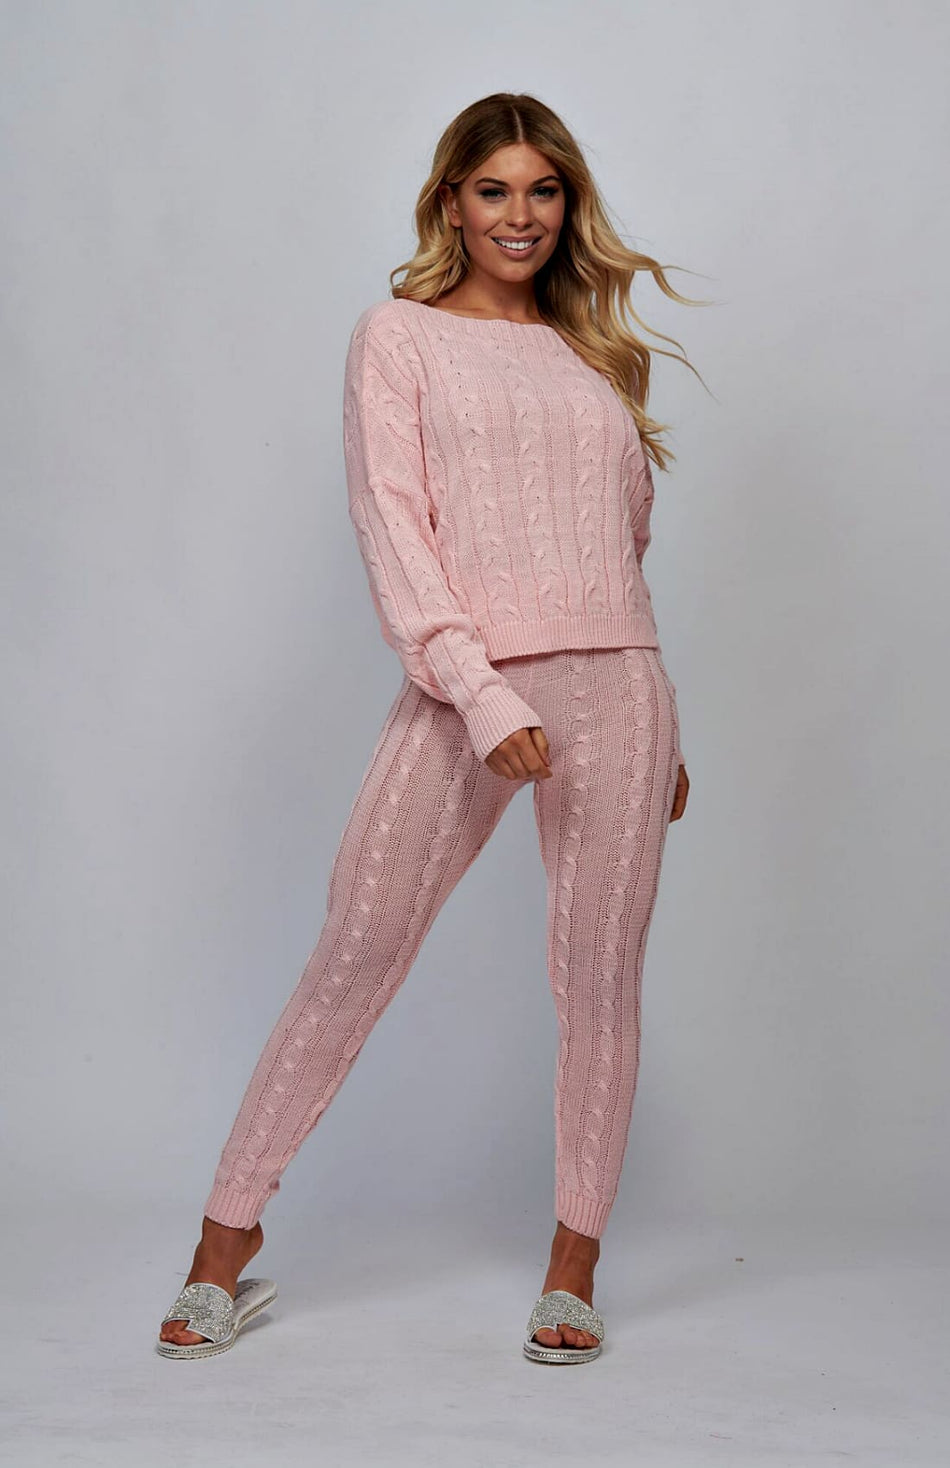 Knitted Loungewear Leggings Set For Women  International Society of  Precision Agriculture